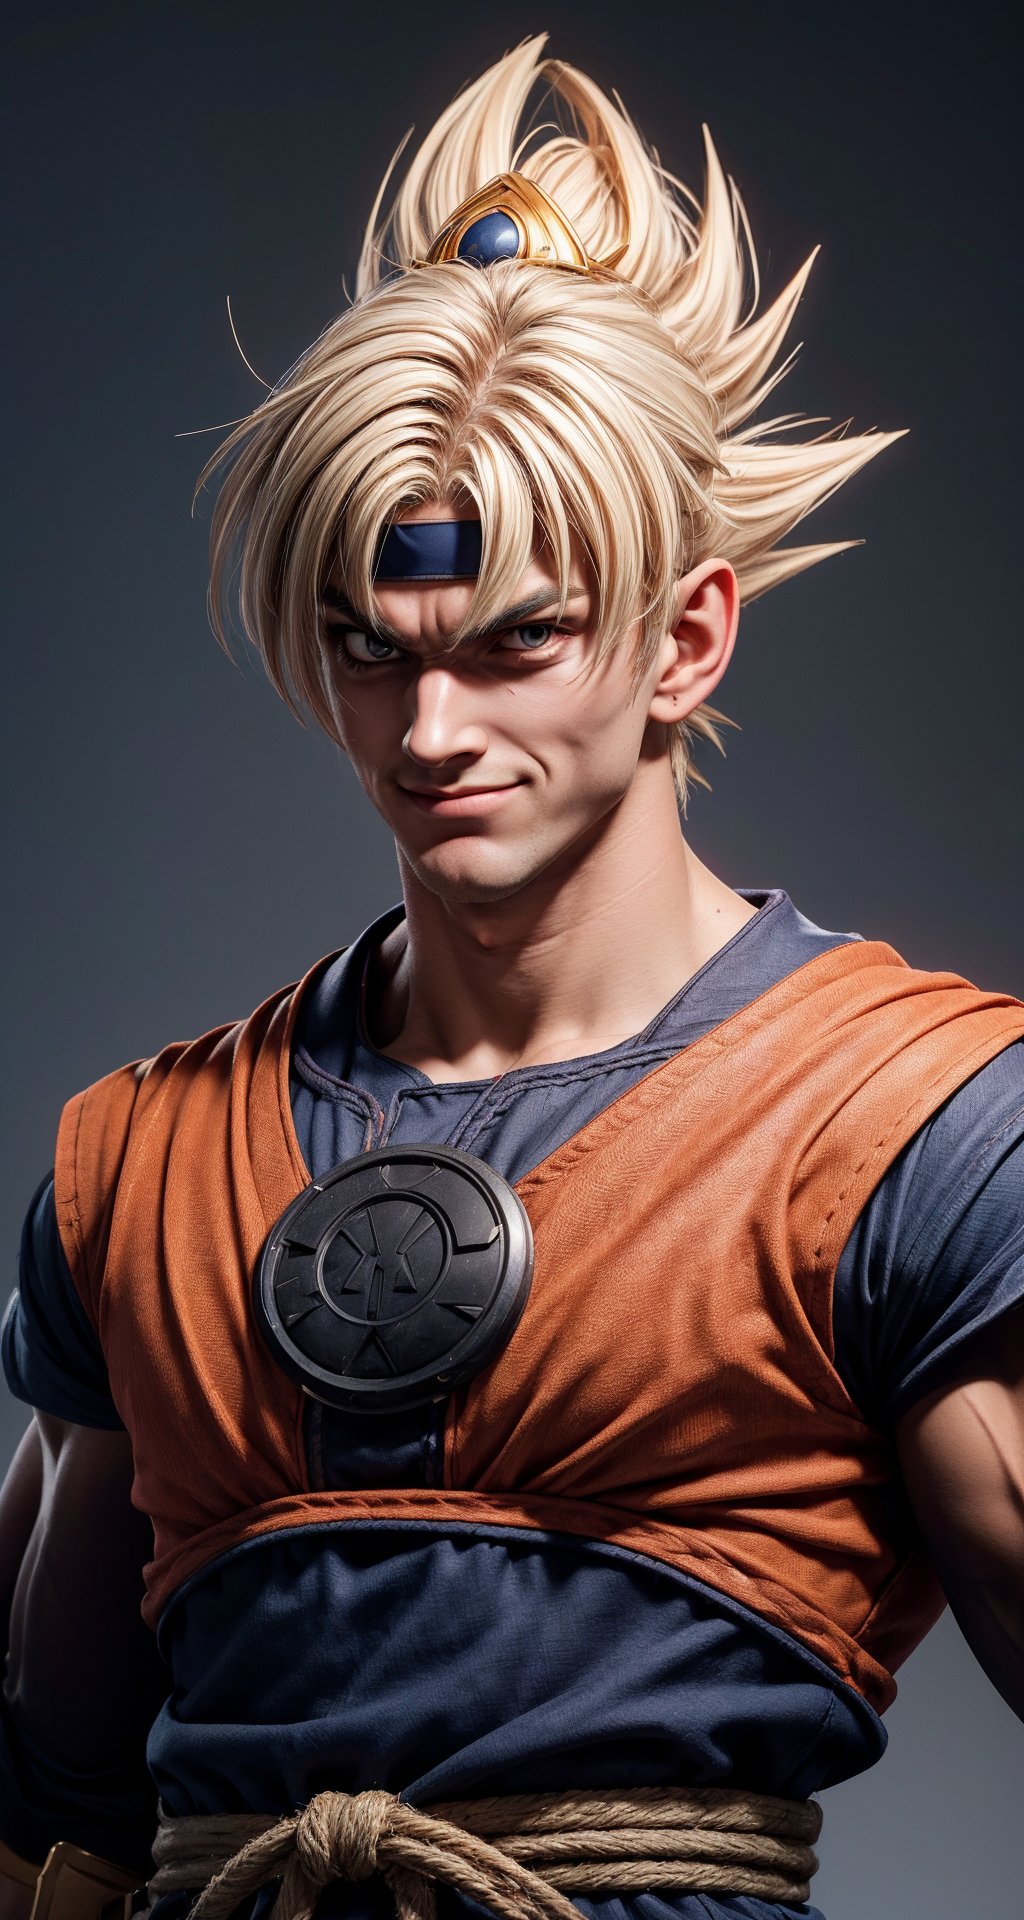 {{masterpiece}}}, {{{best quality}}}, {{{ultra-detailed}}}, {cinematic lighting}, {illustration).
Goku, with his piercing gaze and dark eyes filled with determination, reflects his fearless spirit. His long, spiky blond hair, characteristic of Saiyans, frames his face with an air of constant adventure. His genuine smile radiates warmth and confidence, while his muscular, athletic build evidences his rigorous training. His mark of character, his scars from past battles,  add depth to his figure. Detailed skin texture. Taken together, these physical traits portray Goku as an unflappable and friendly hero with an unmistakable aura.
Defiant look at the viewer.
with a medium shot that shows the character centered in the frame, (looking directly at the viewer: 1.2). ((Also, make sure his entire body is facing the viewer to create a sense of connection: 1.6)).
((Goku's characteristic orange and blue uniform: 1.4)).
(((Emblematic Logo embodied on his chest: 1.6)))
((Total absence of background, gray fade: 1.8))